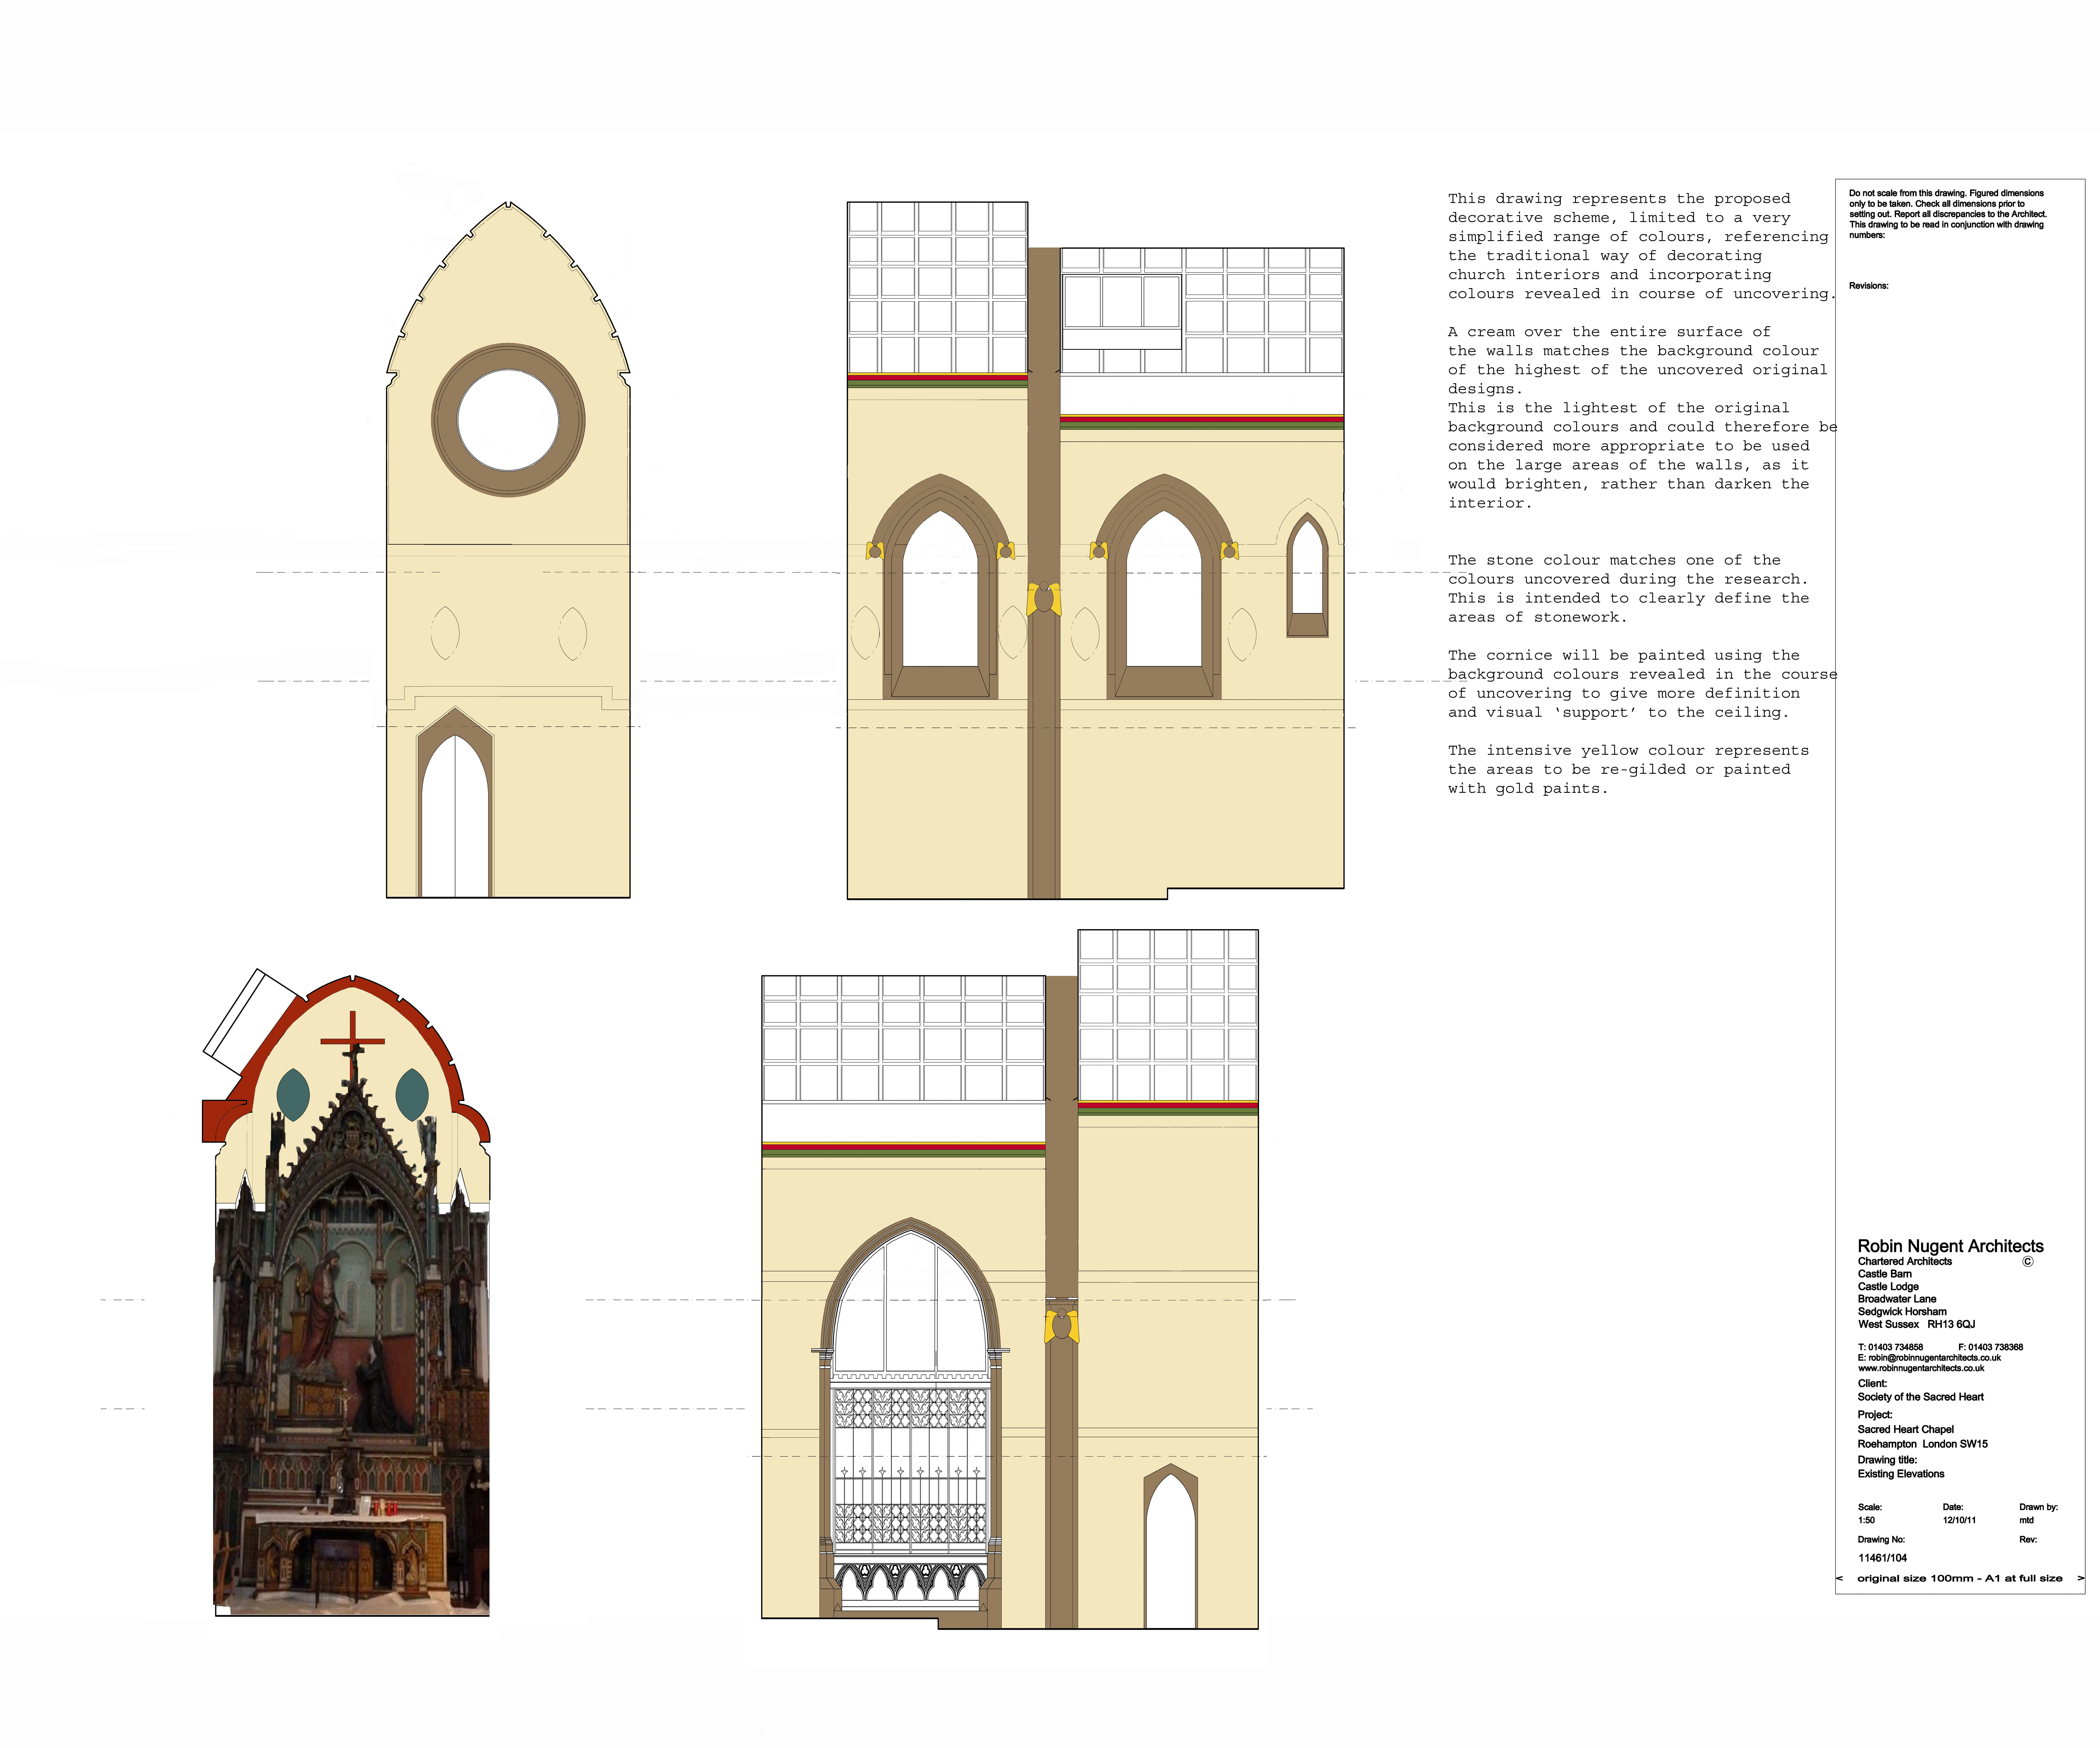 Graphic programs and visualisation may be useful when presenting spot uncovering results and potential representation options to the architect and client, Chapel of the Sacred Heart, Roehampton